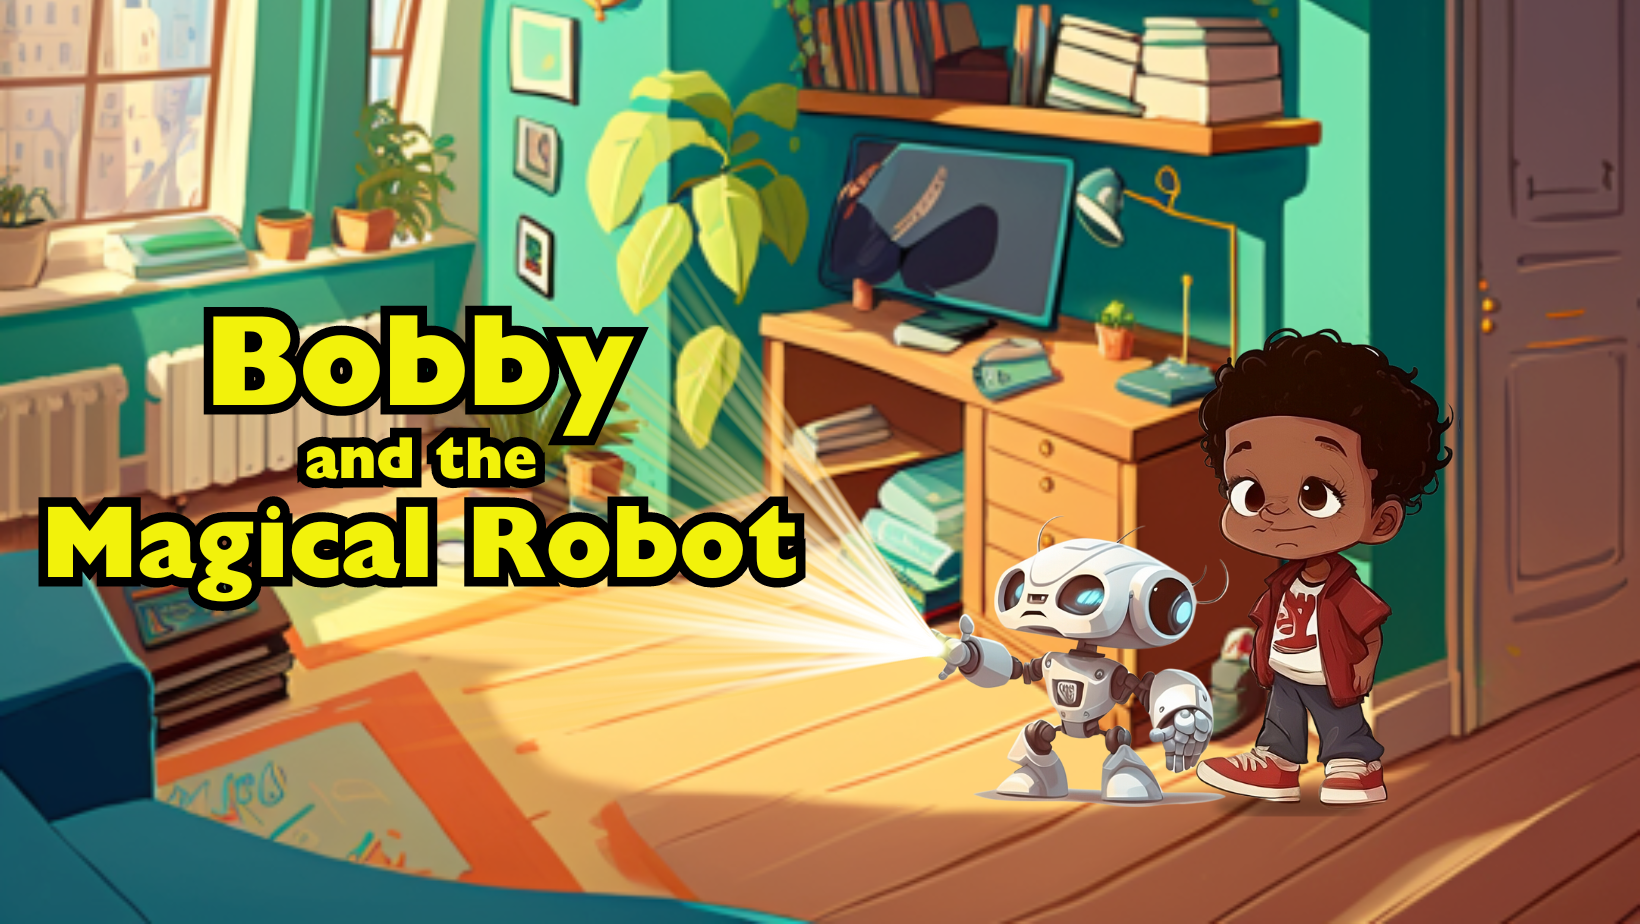 children book, Bobby and the Magical Robot in room